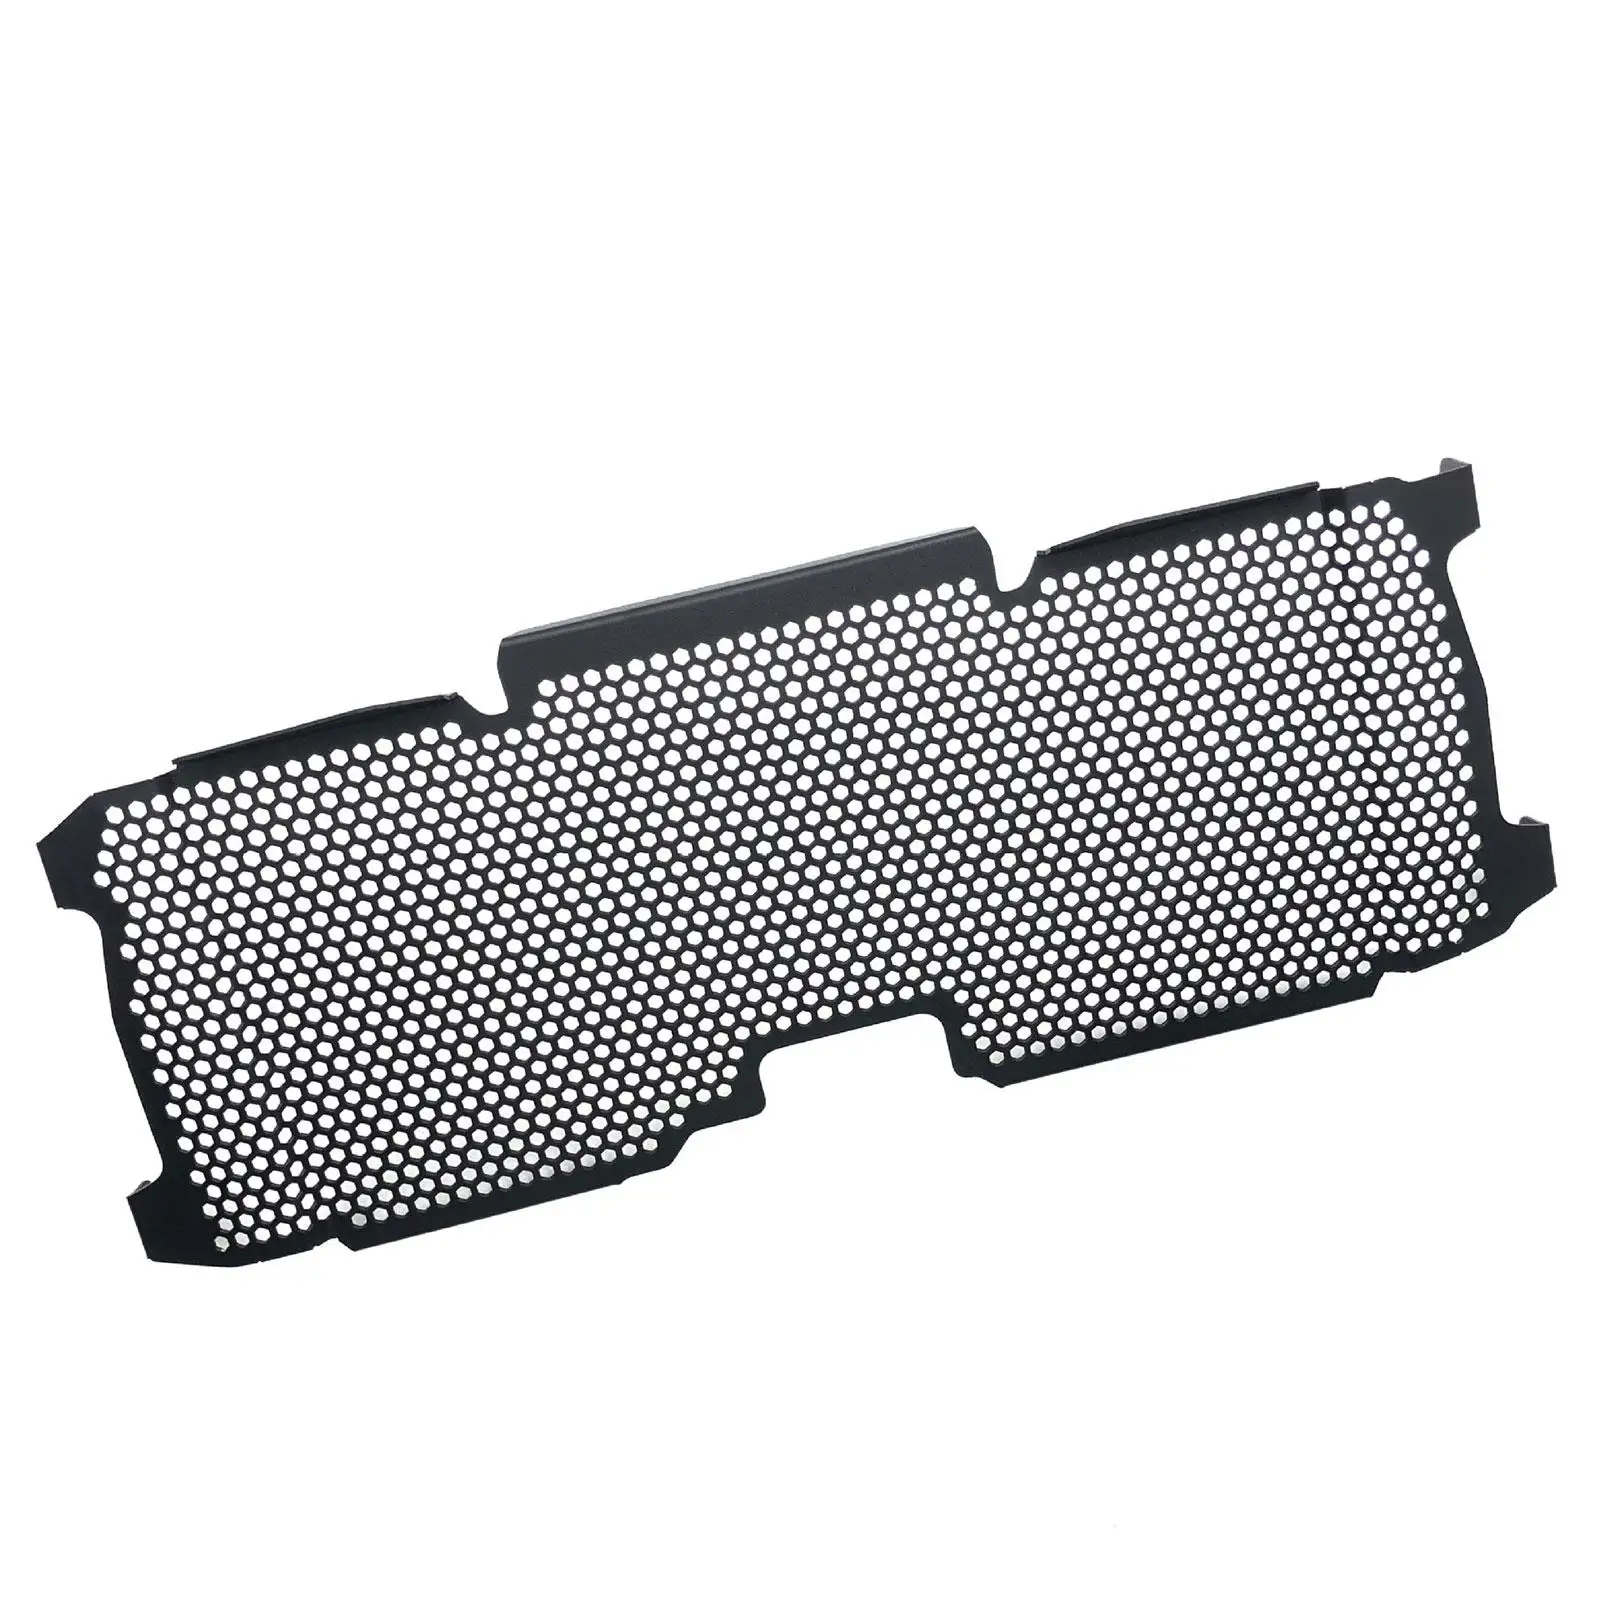 Radiator Guard Grille Protector Direct Replaces Durable for BMW R1200RS